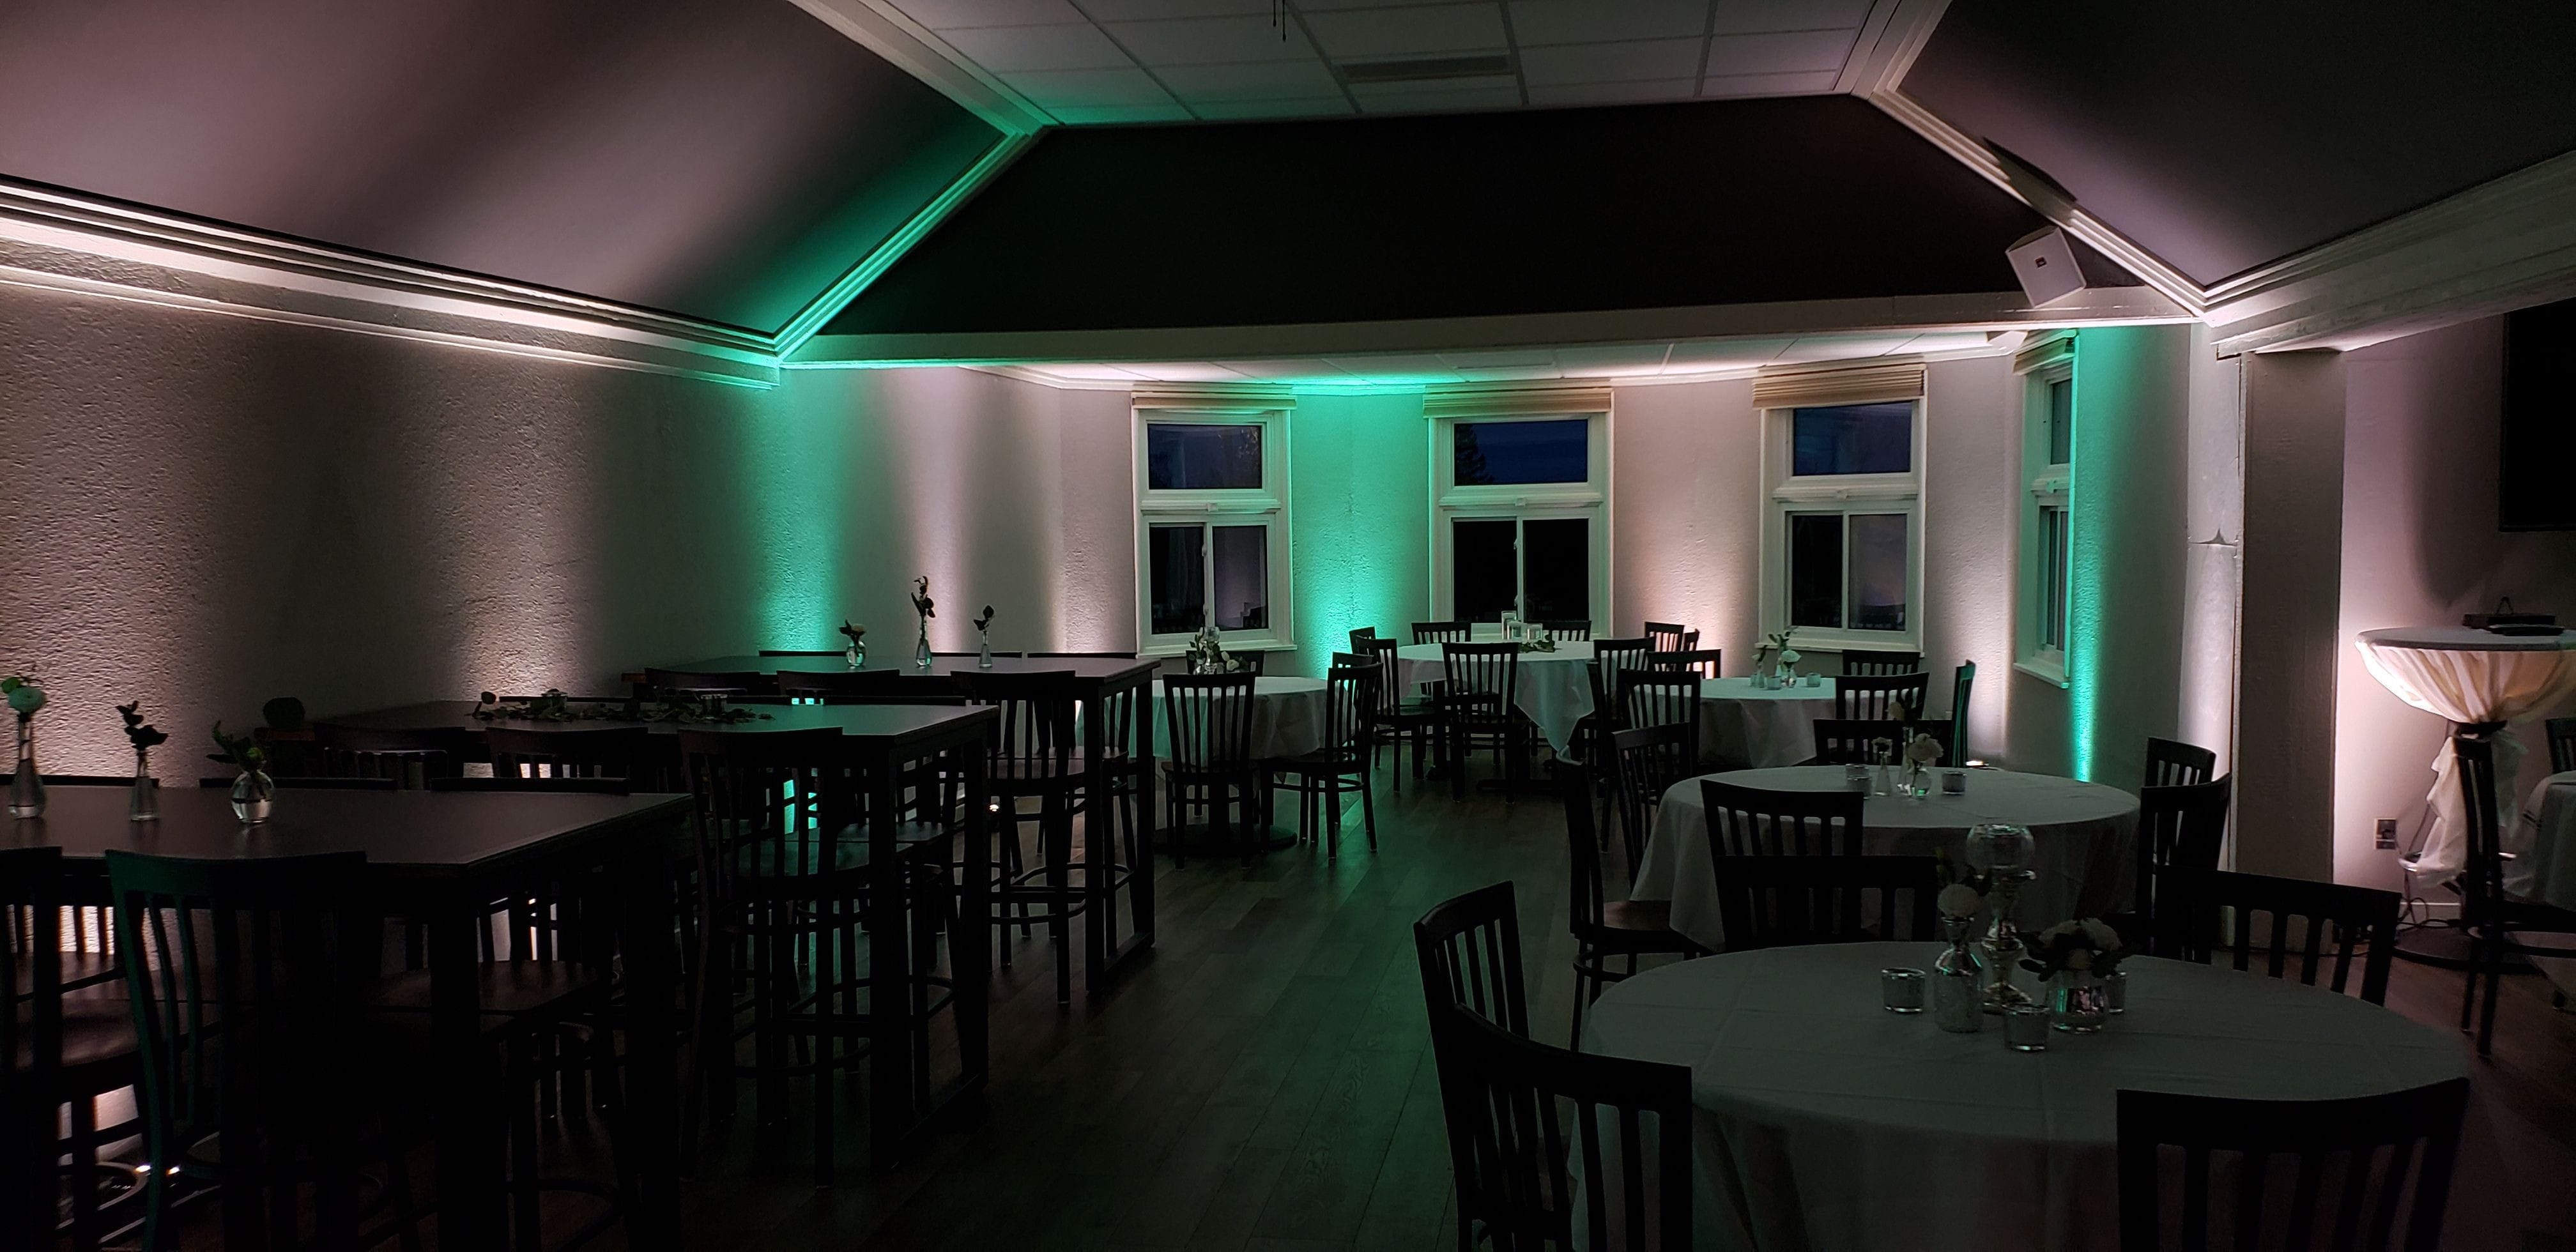 Wedding at Ridgeview Country Club. Up lighting in soft white and mint green